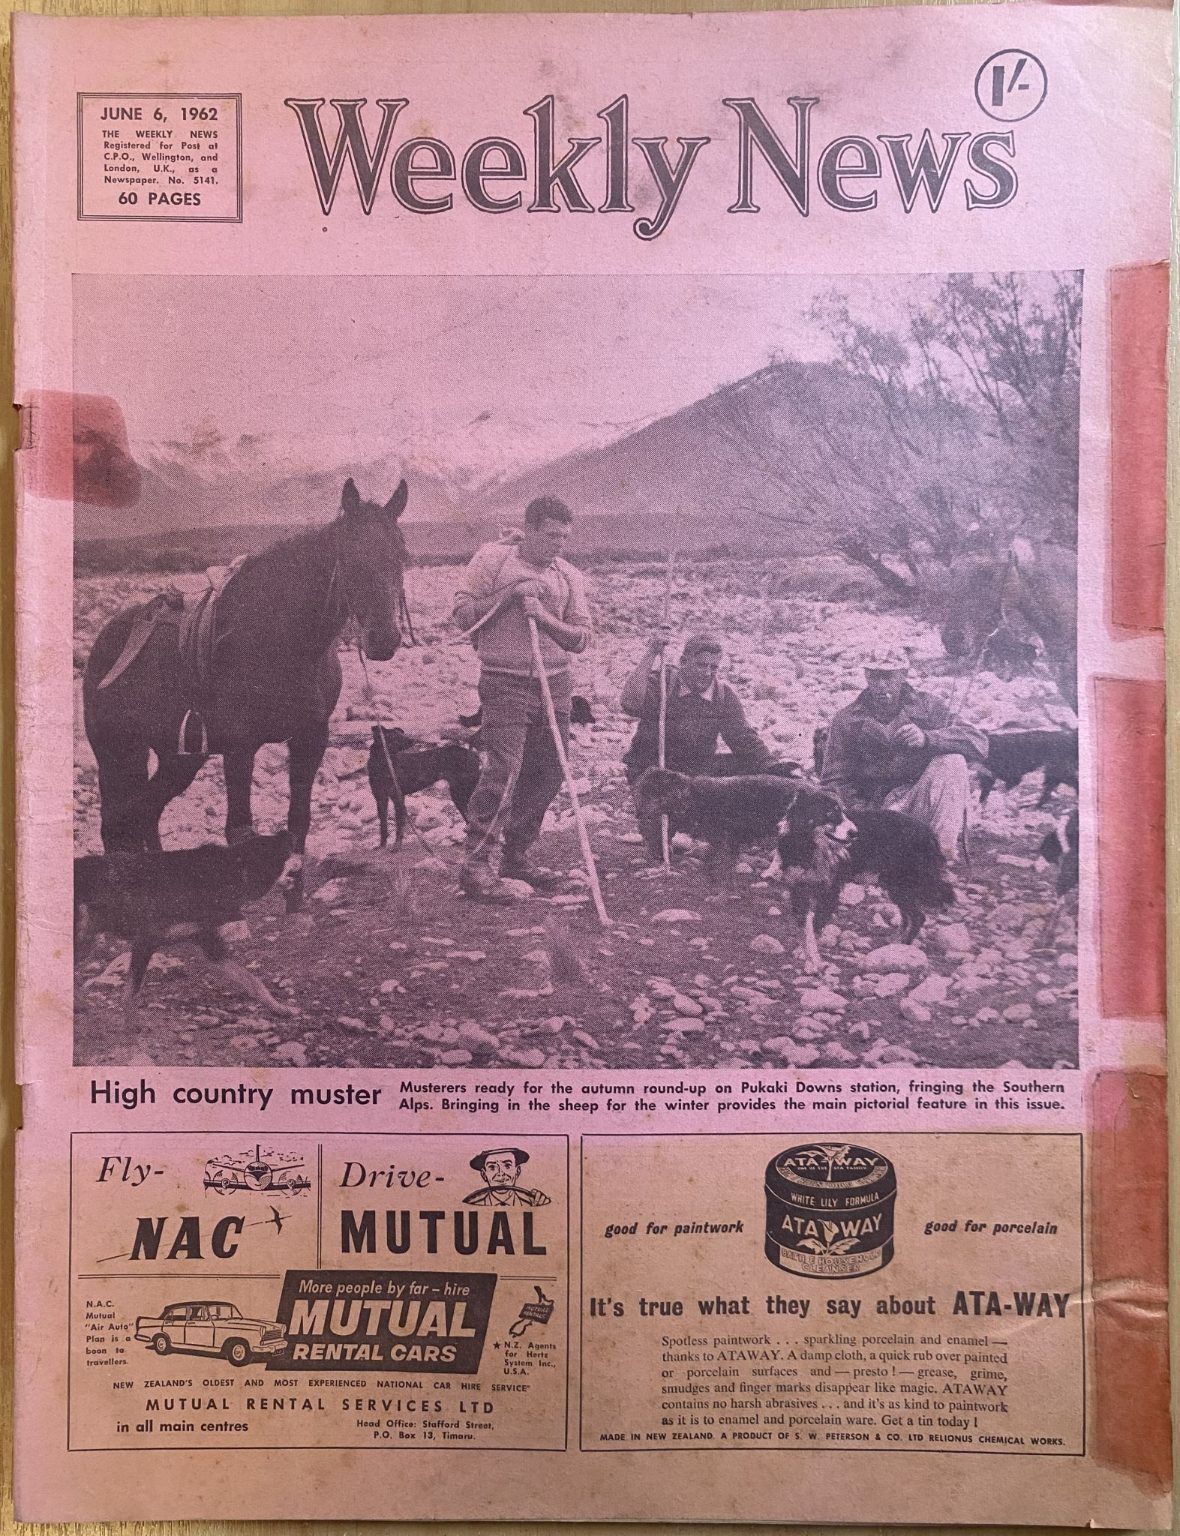 OLD NEWSPAPER: The Weekly News, No. 5141, 6 June 1962